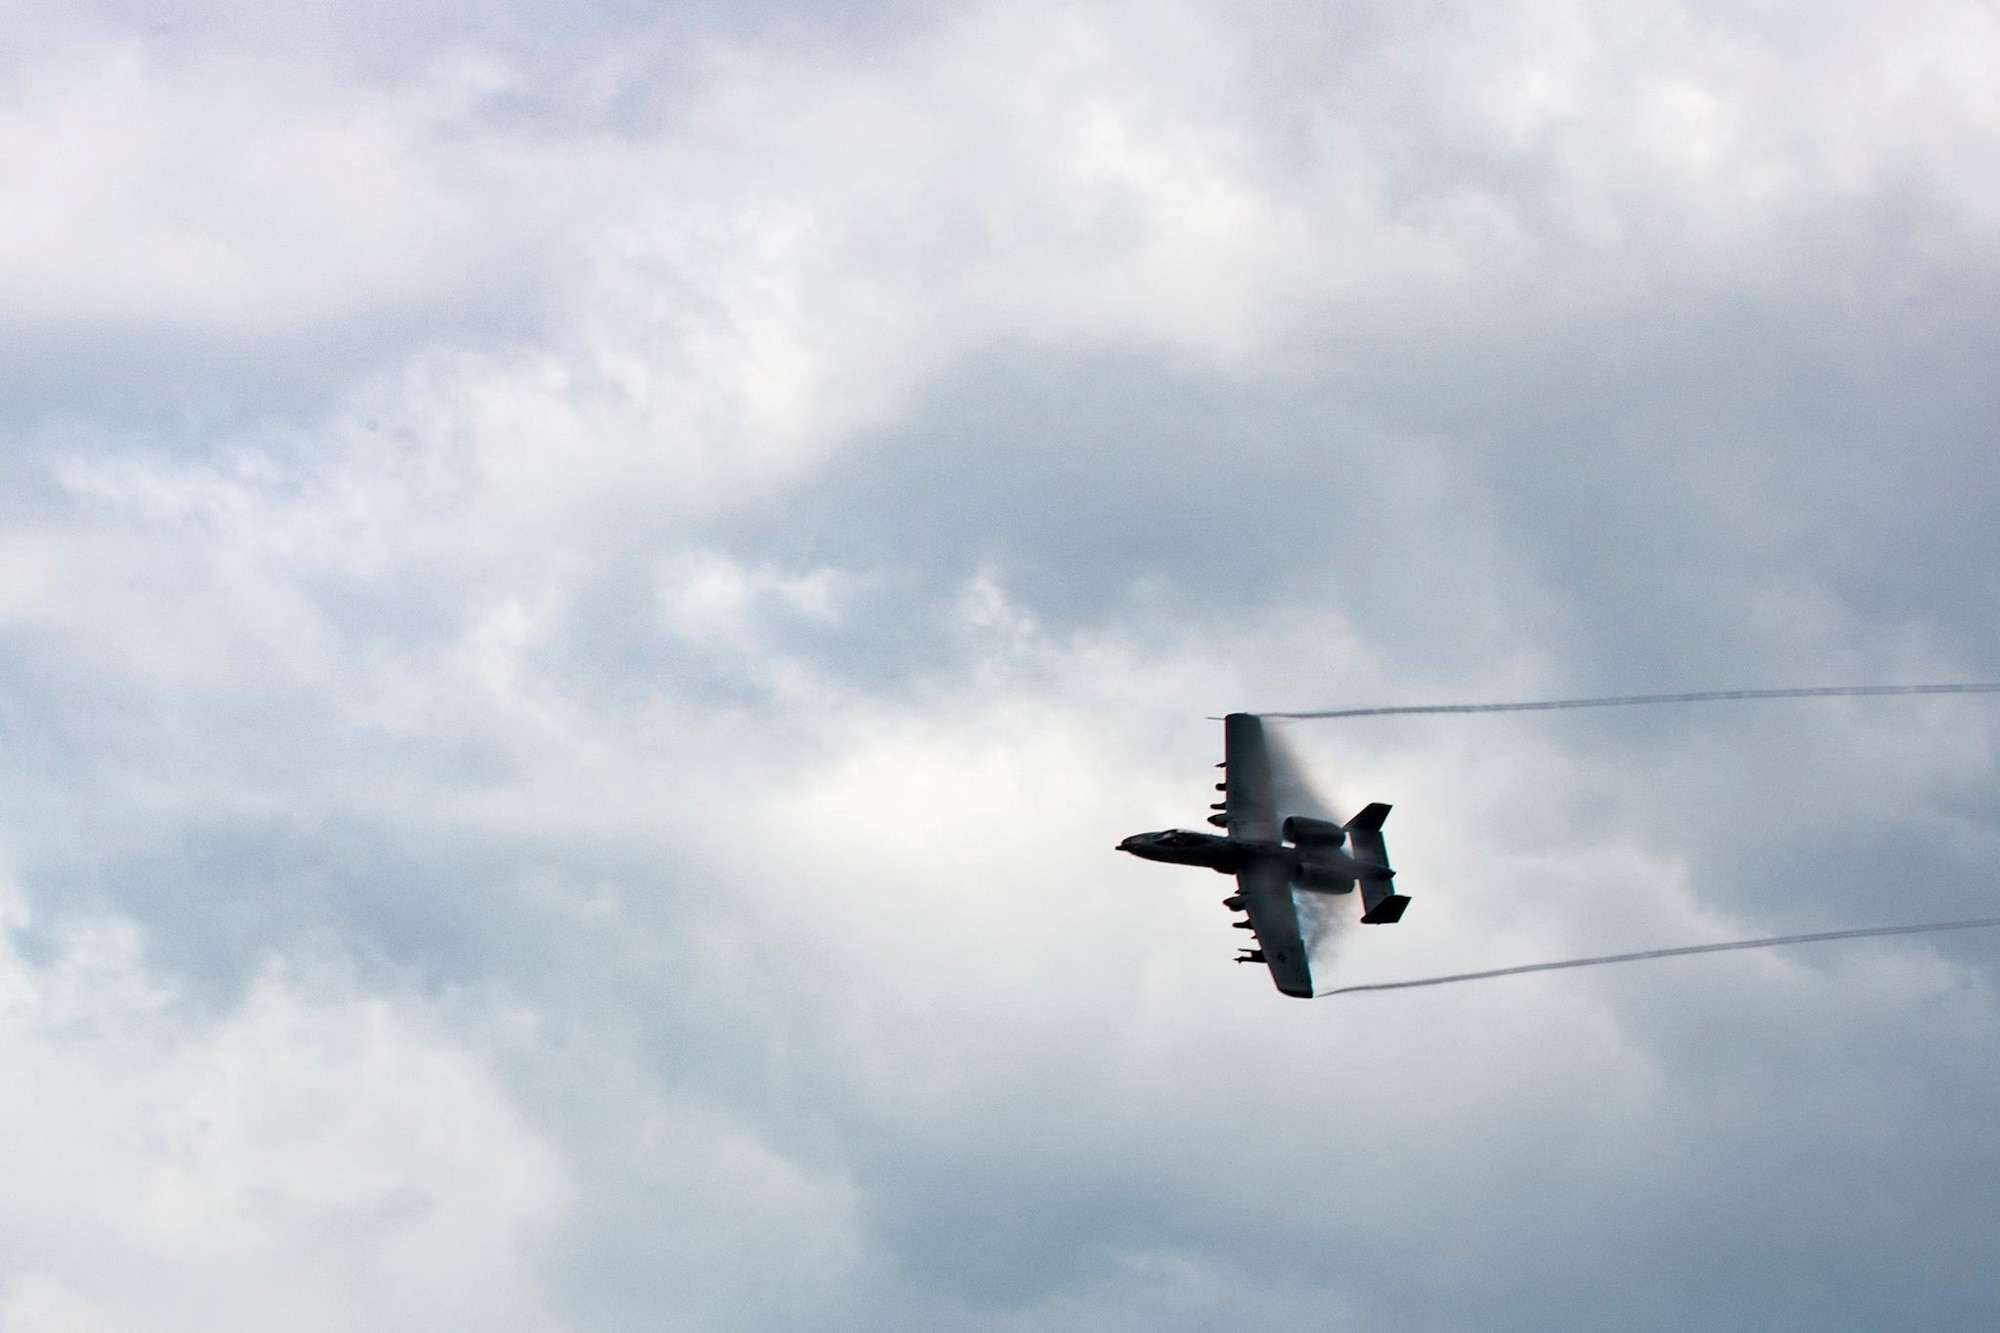 An A-10C Thunderbolt II conducts a show of force maneuver during training.